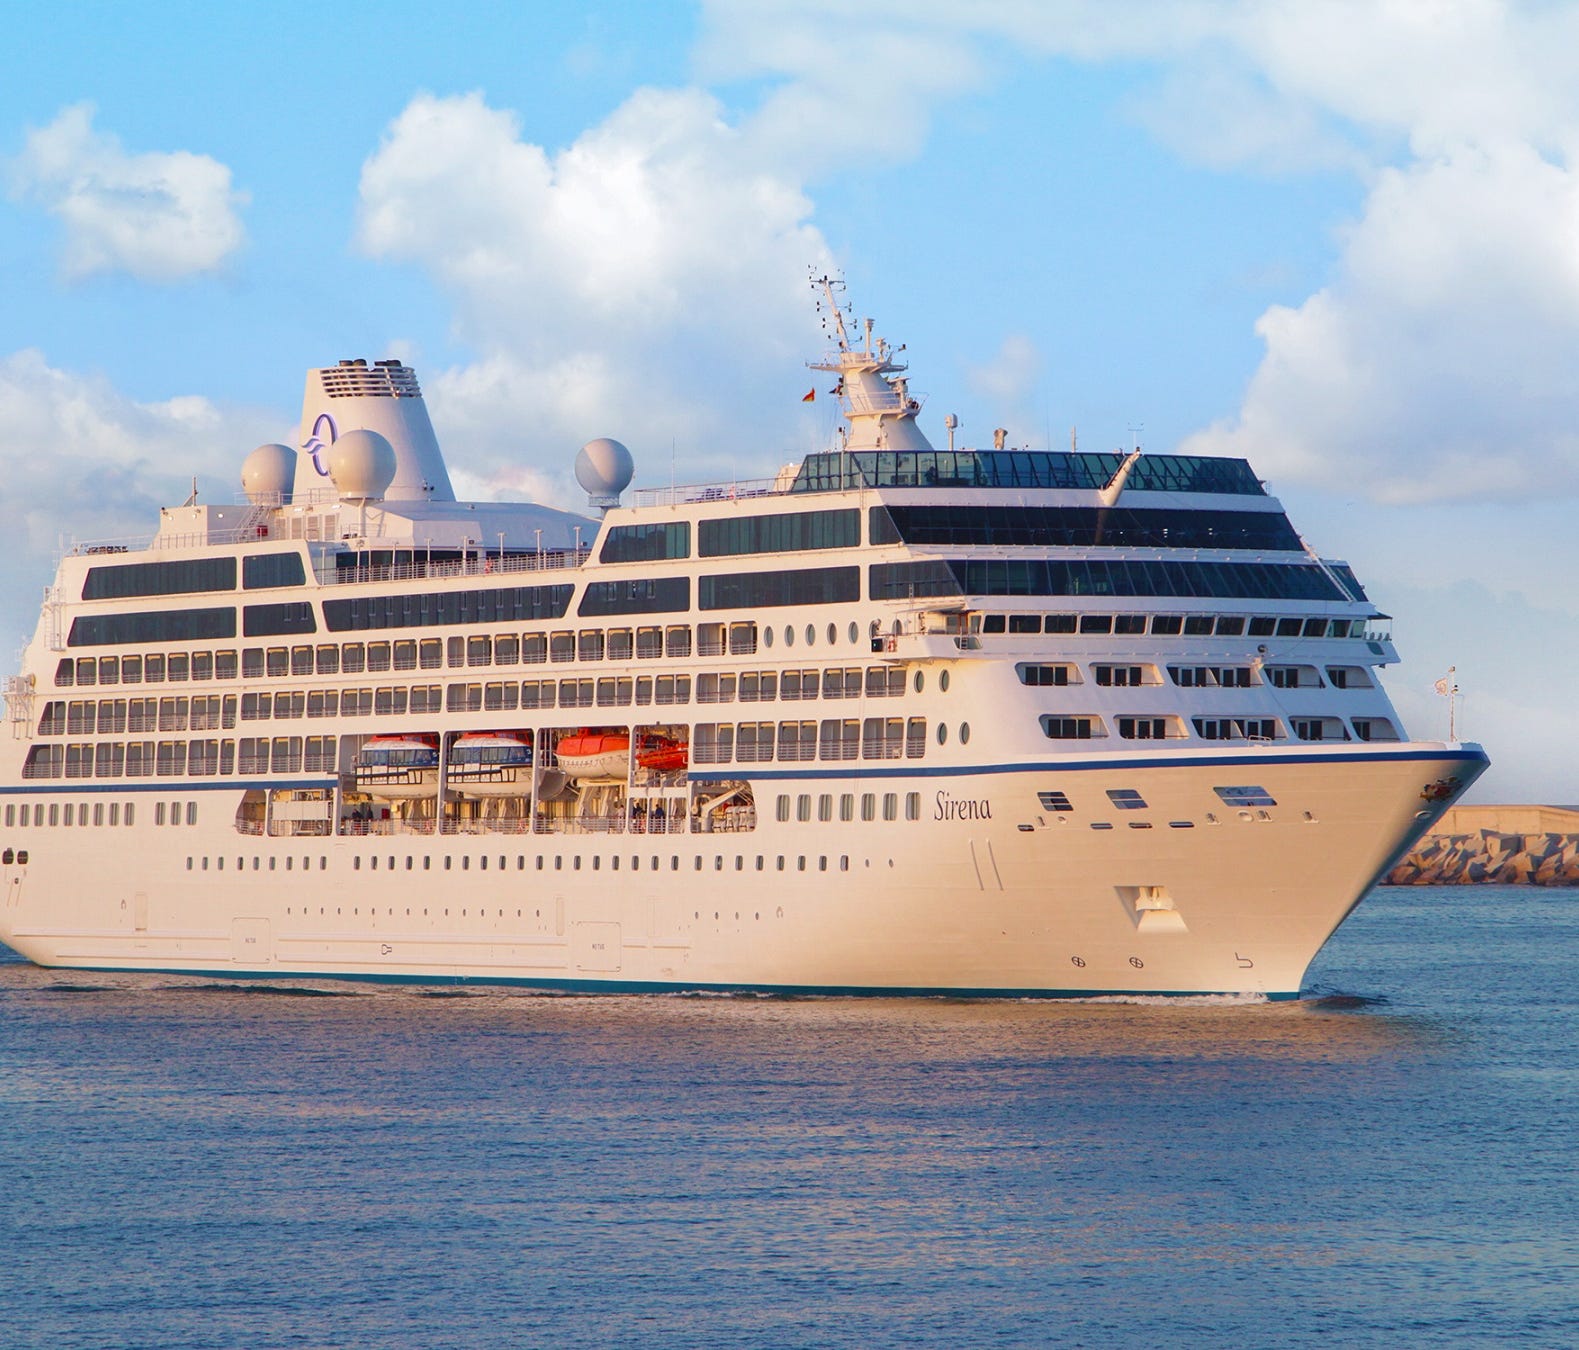 Originally built in 1999, the 684-passenger Sirena joined the Oceania Cruises fleet in April 2016 after a massive, $50 million overhaul.